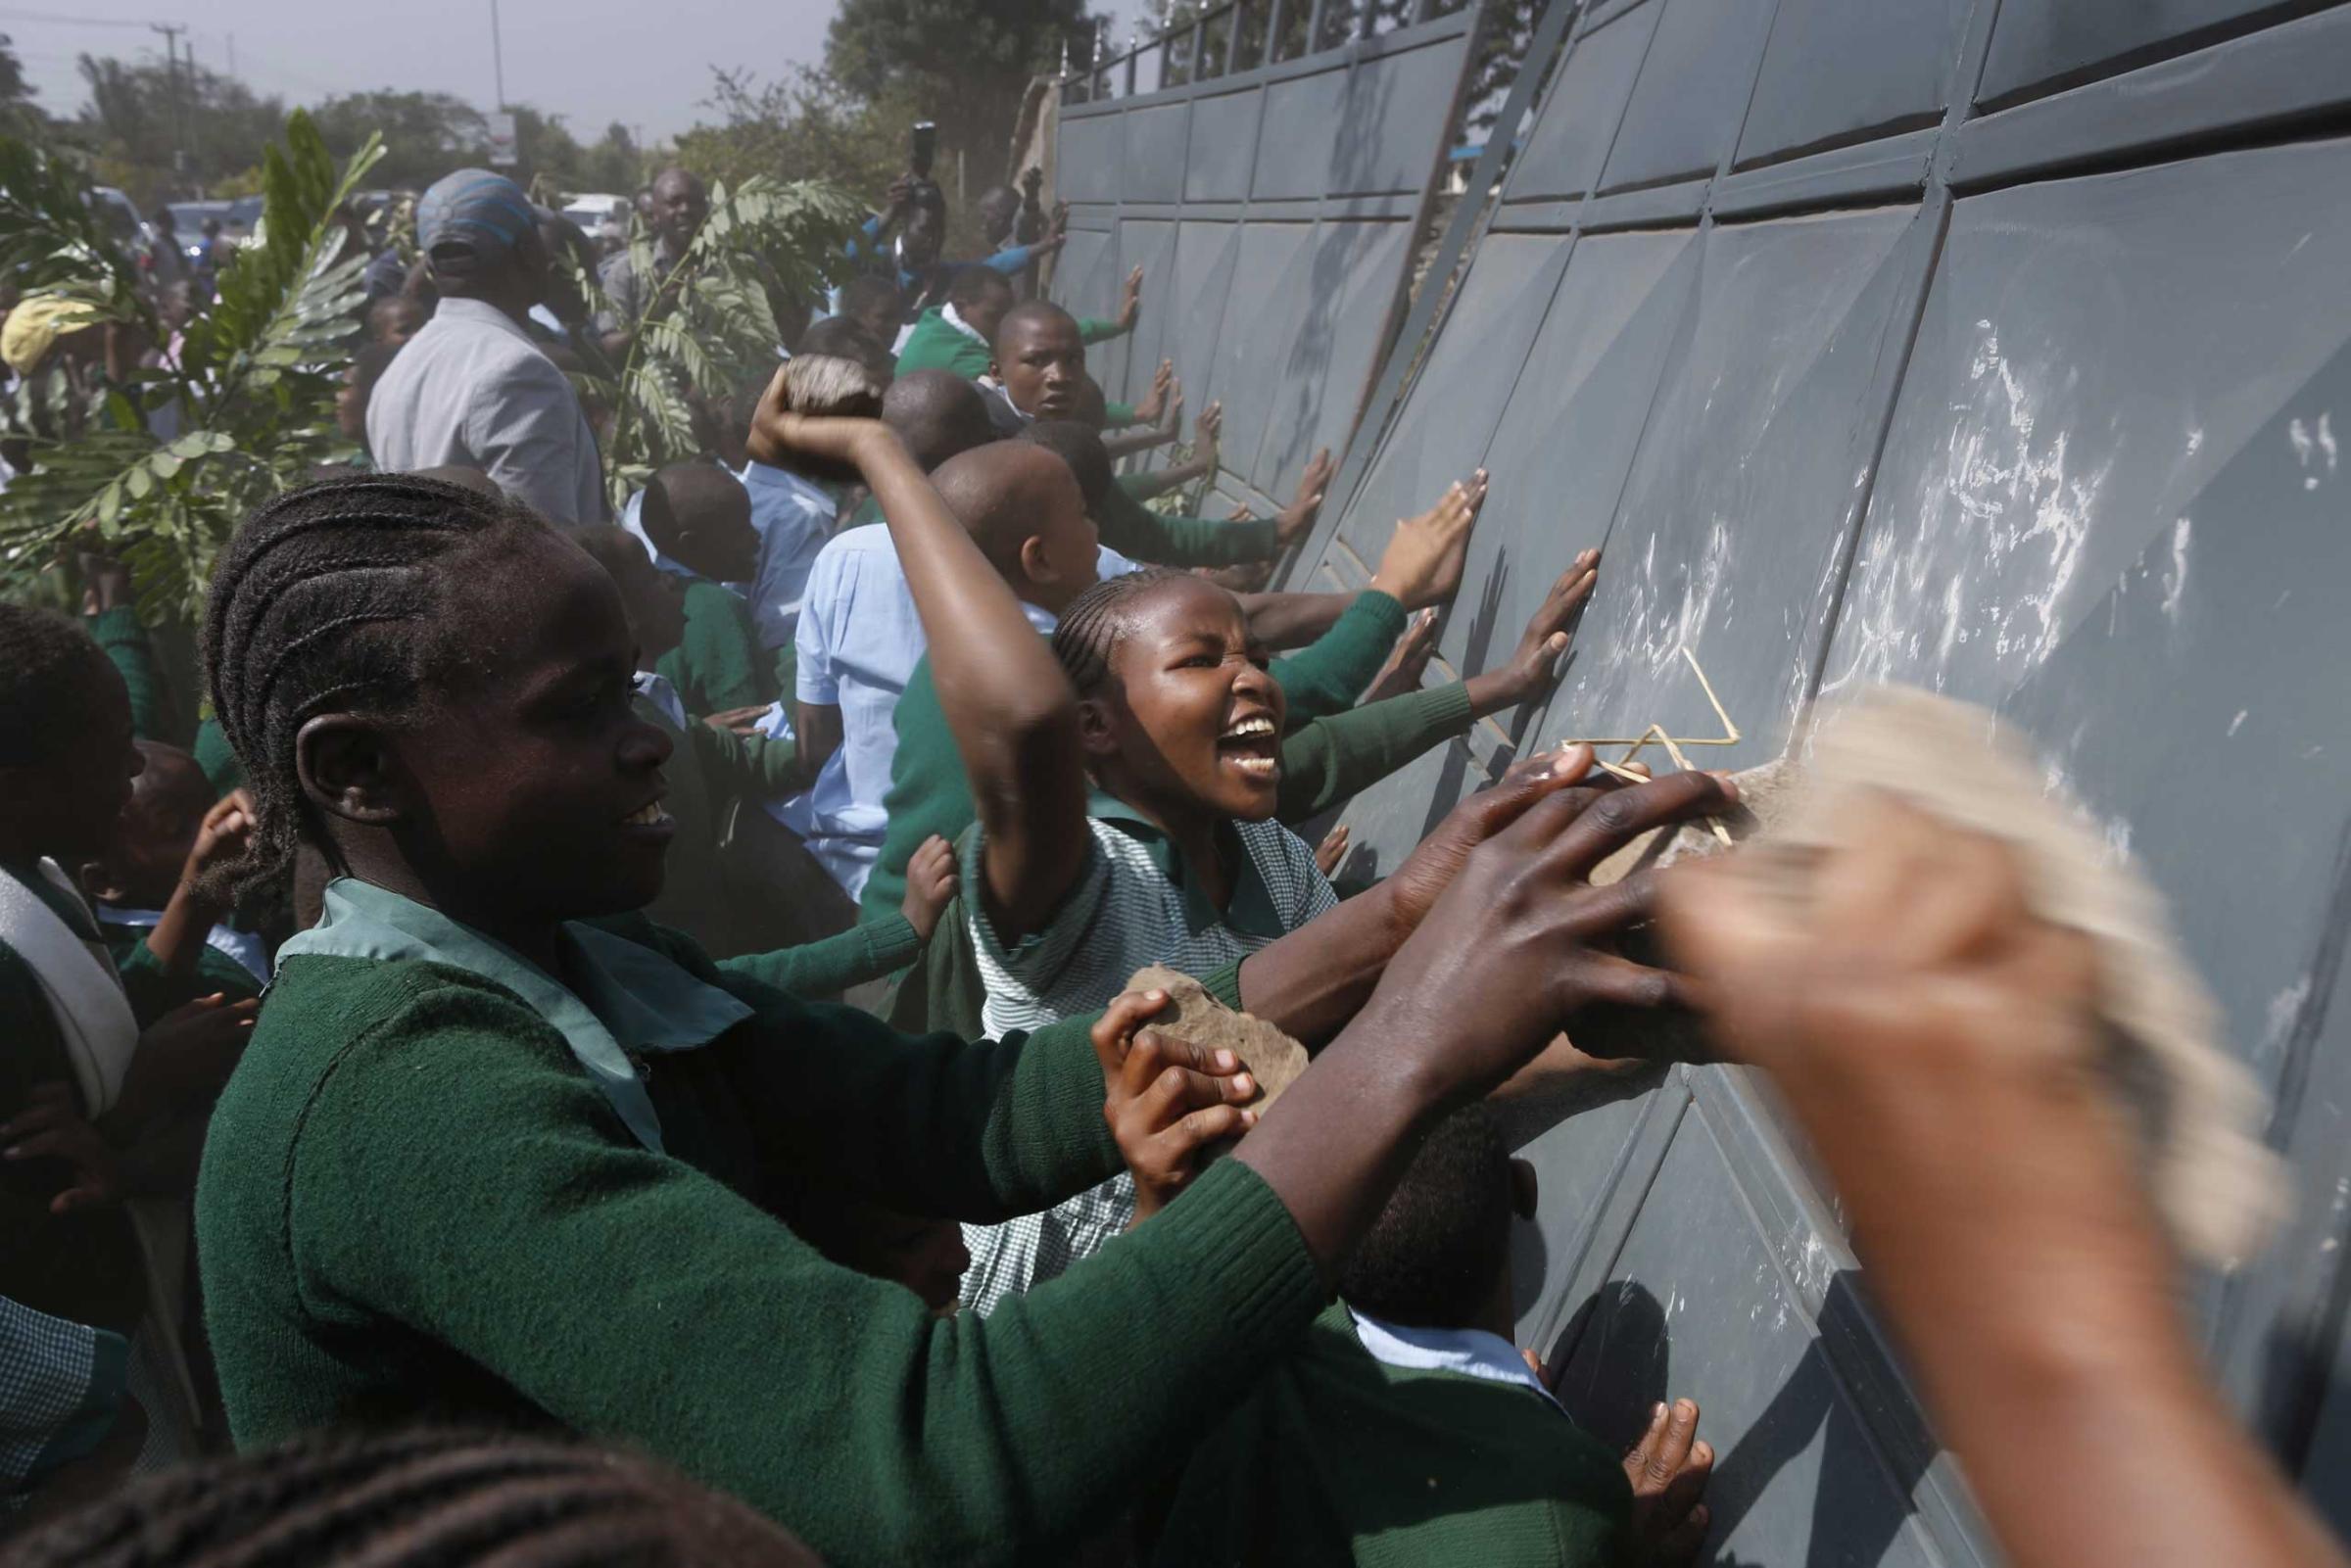 School children push the fence to enter the school playground during a protest against alleged land grabbing at Langata Road Primary School in Nairobi, Jan. 19, 2015.